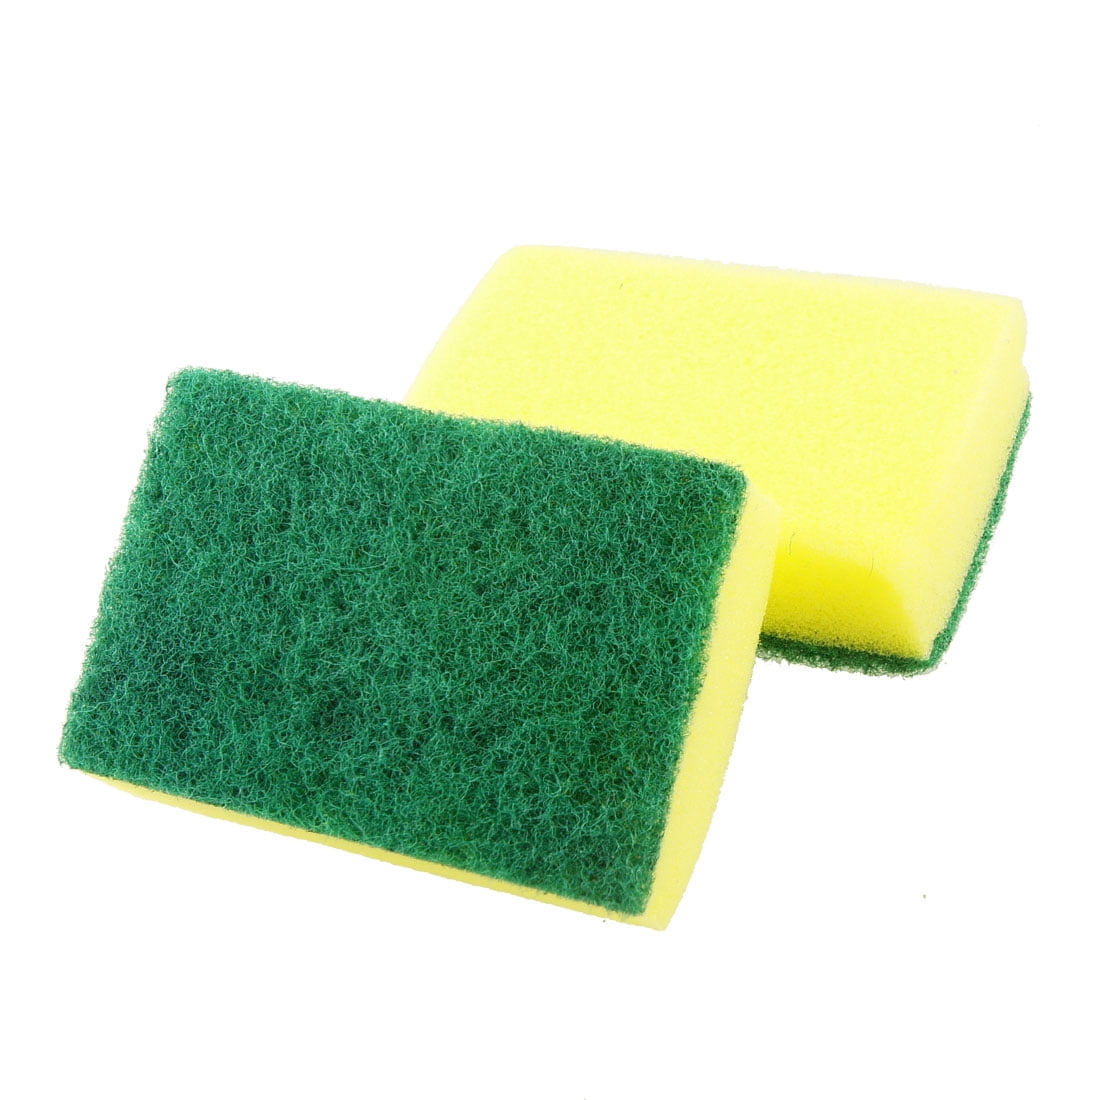 DecorRack Cleaning Scrub Sponges for Kitchen, Dishes, Bathroom, Green and  Yellow (Pack of 14)